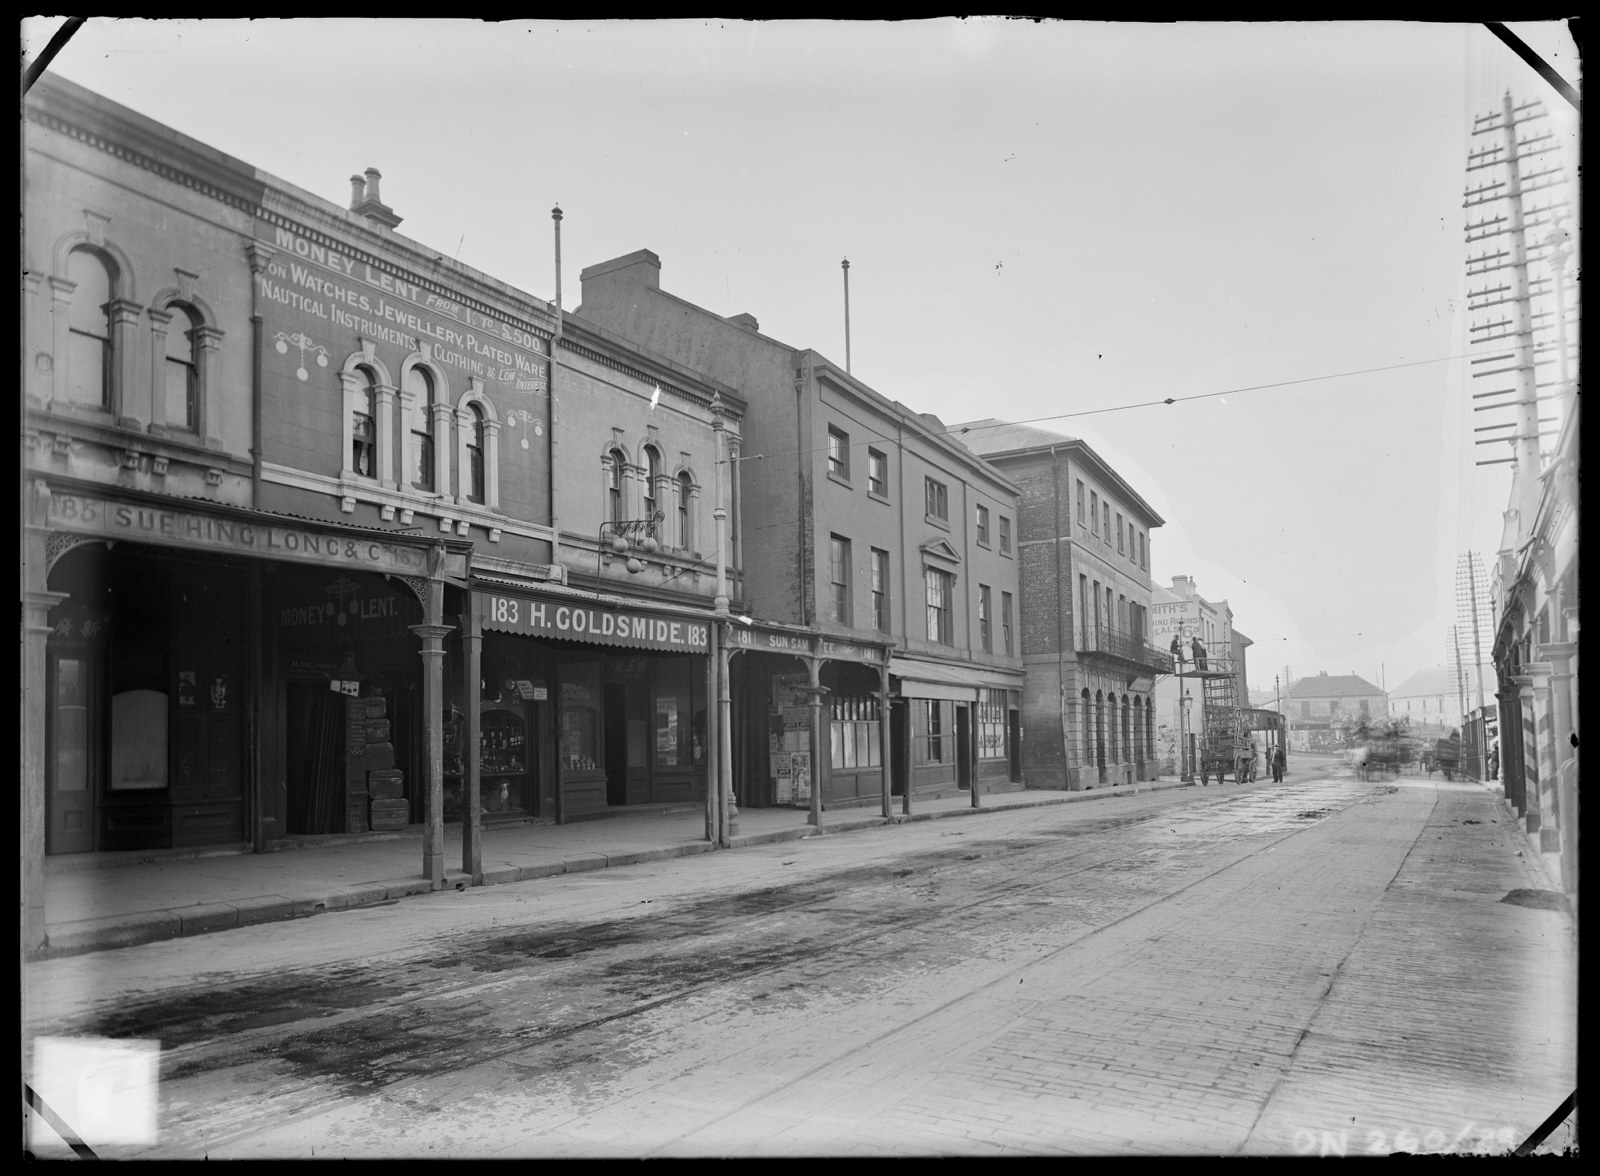 This is a black and white photograph of an empty street with shopfronts and covered awnings.